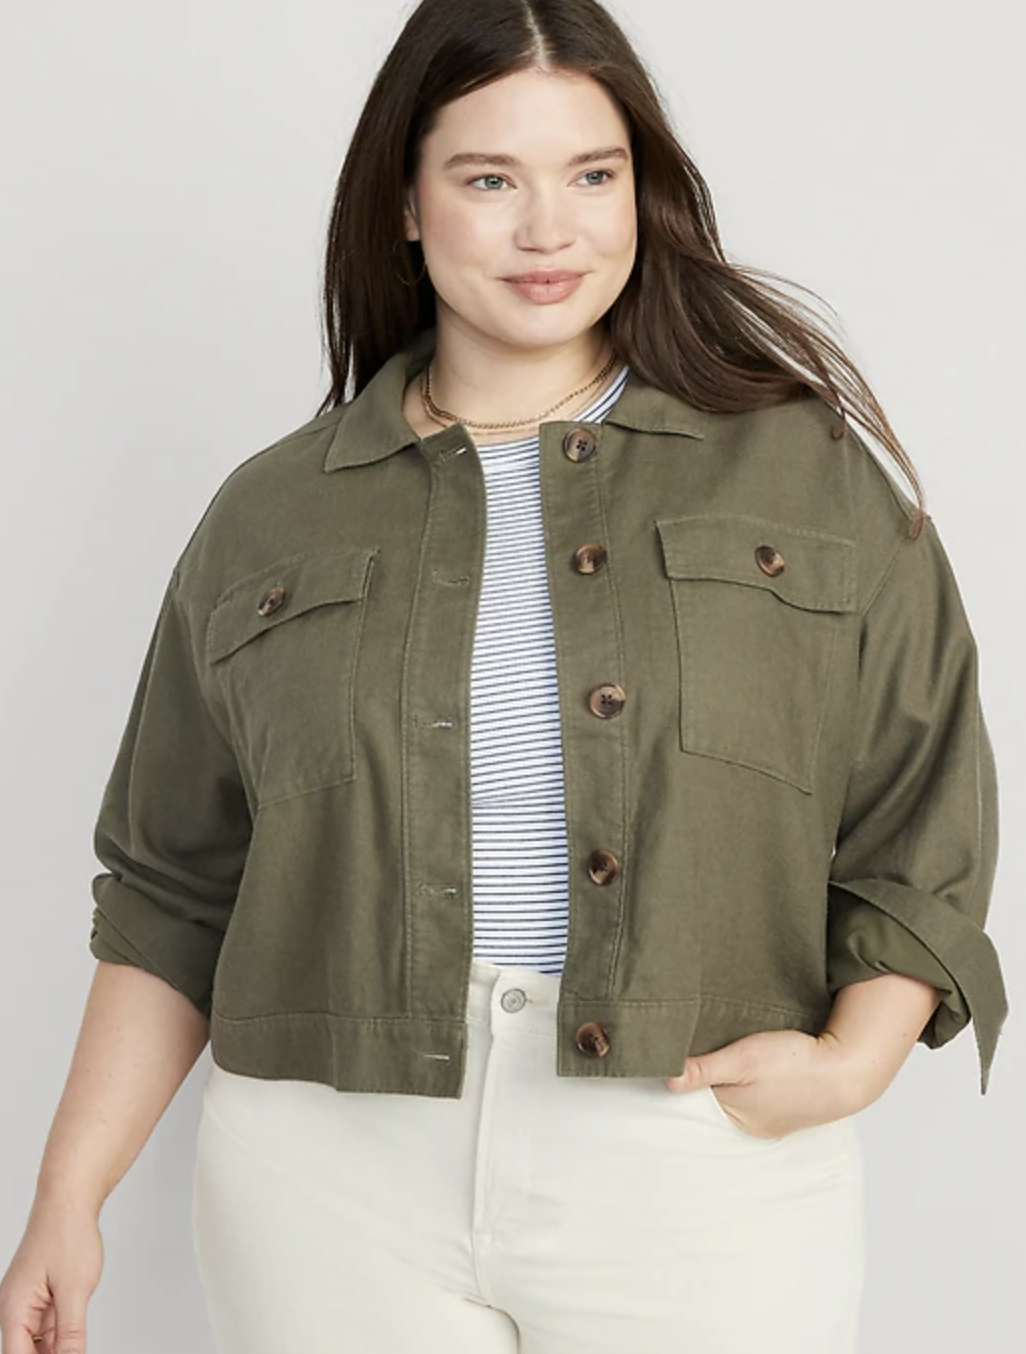 a model wearing the jacket over a striped shirt